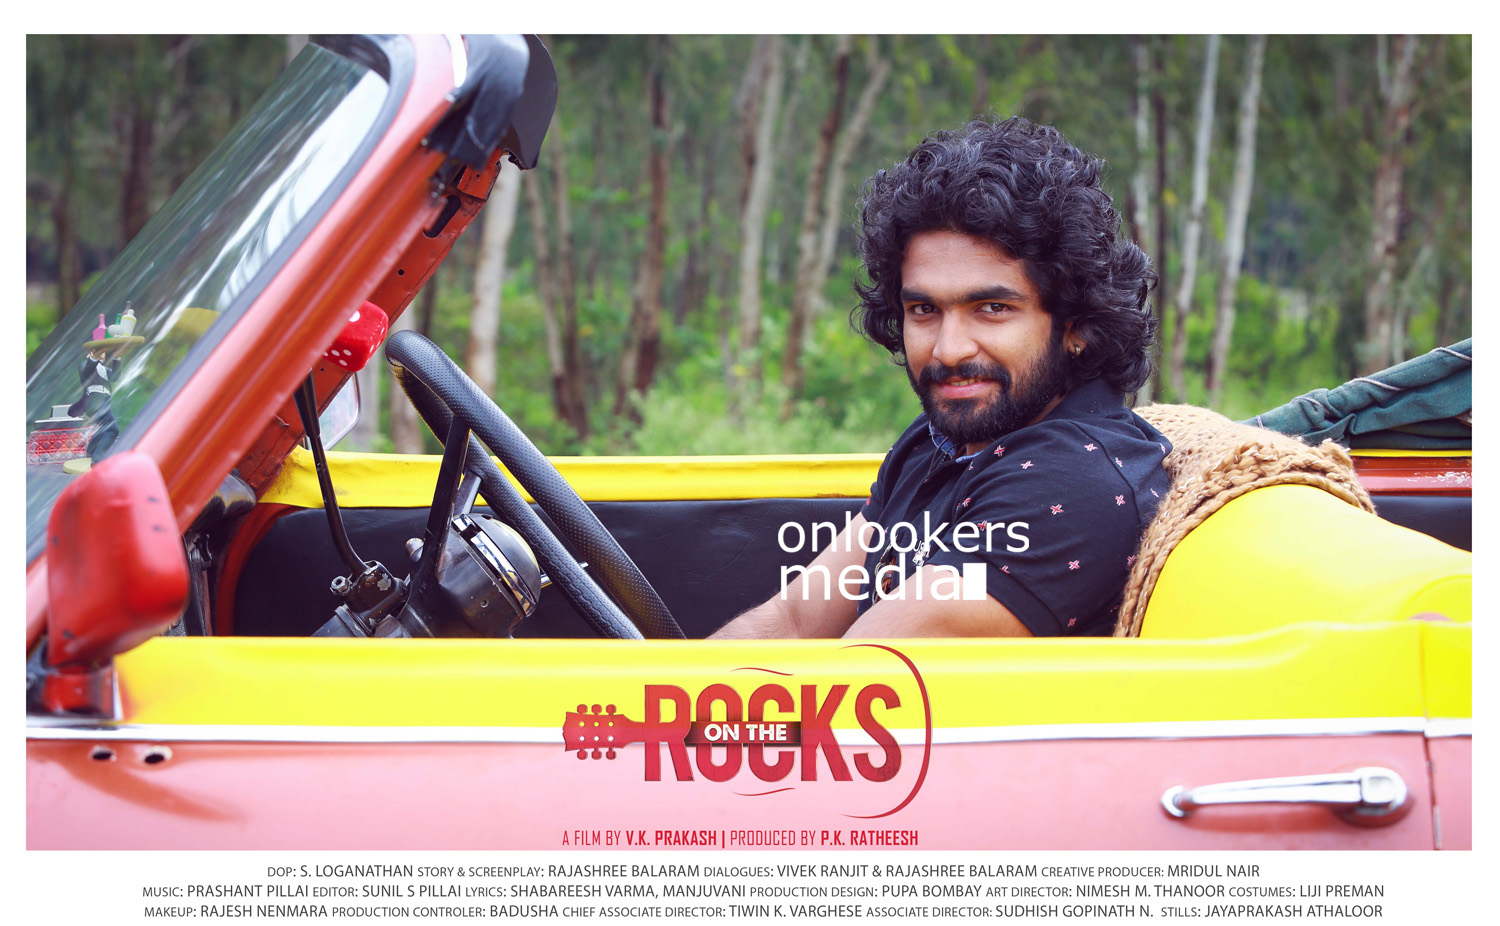 https://onlookersmedia.in/wp-content/uploads/2015/10/Sidharth-Menon-in-On-The-Rocks-Stills-Posters-11.jpg